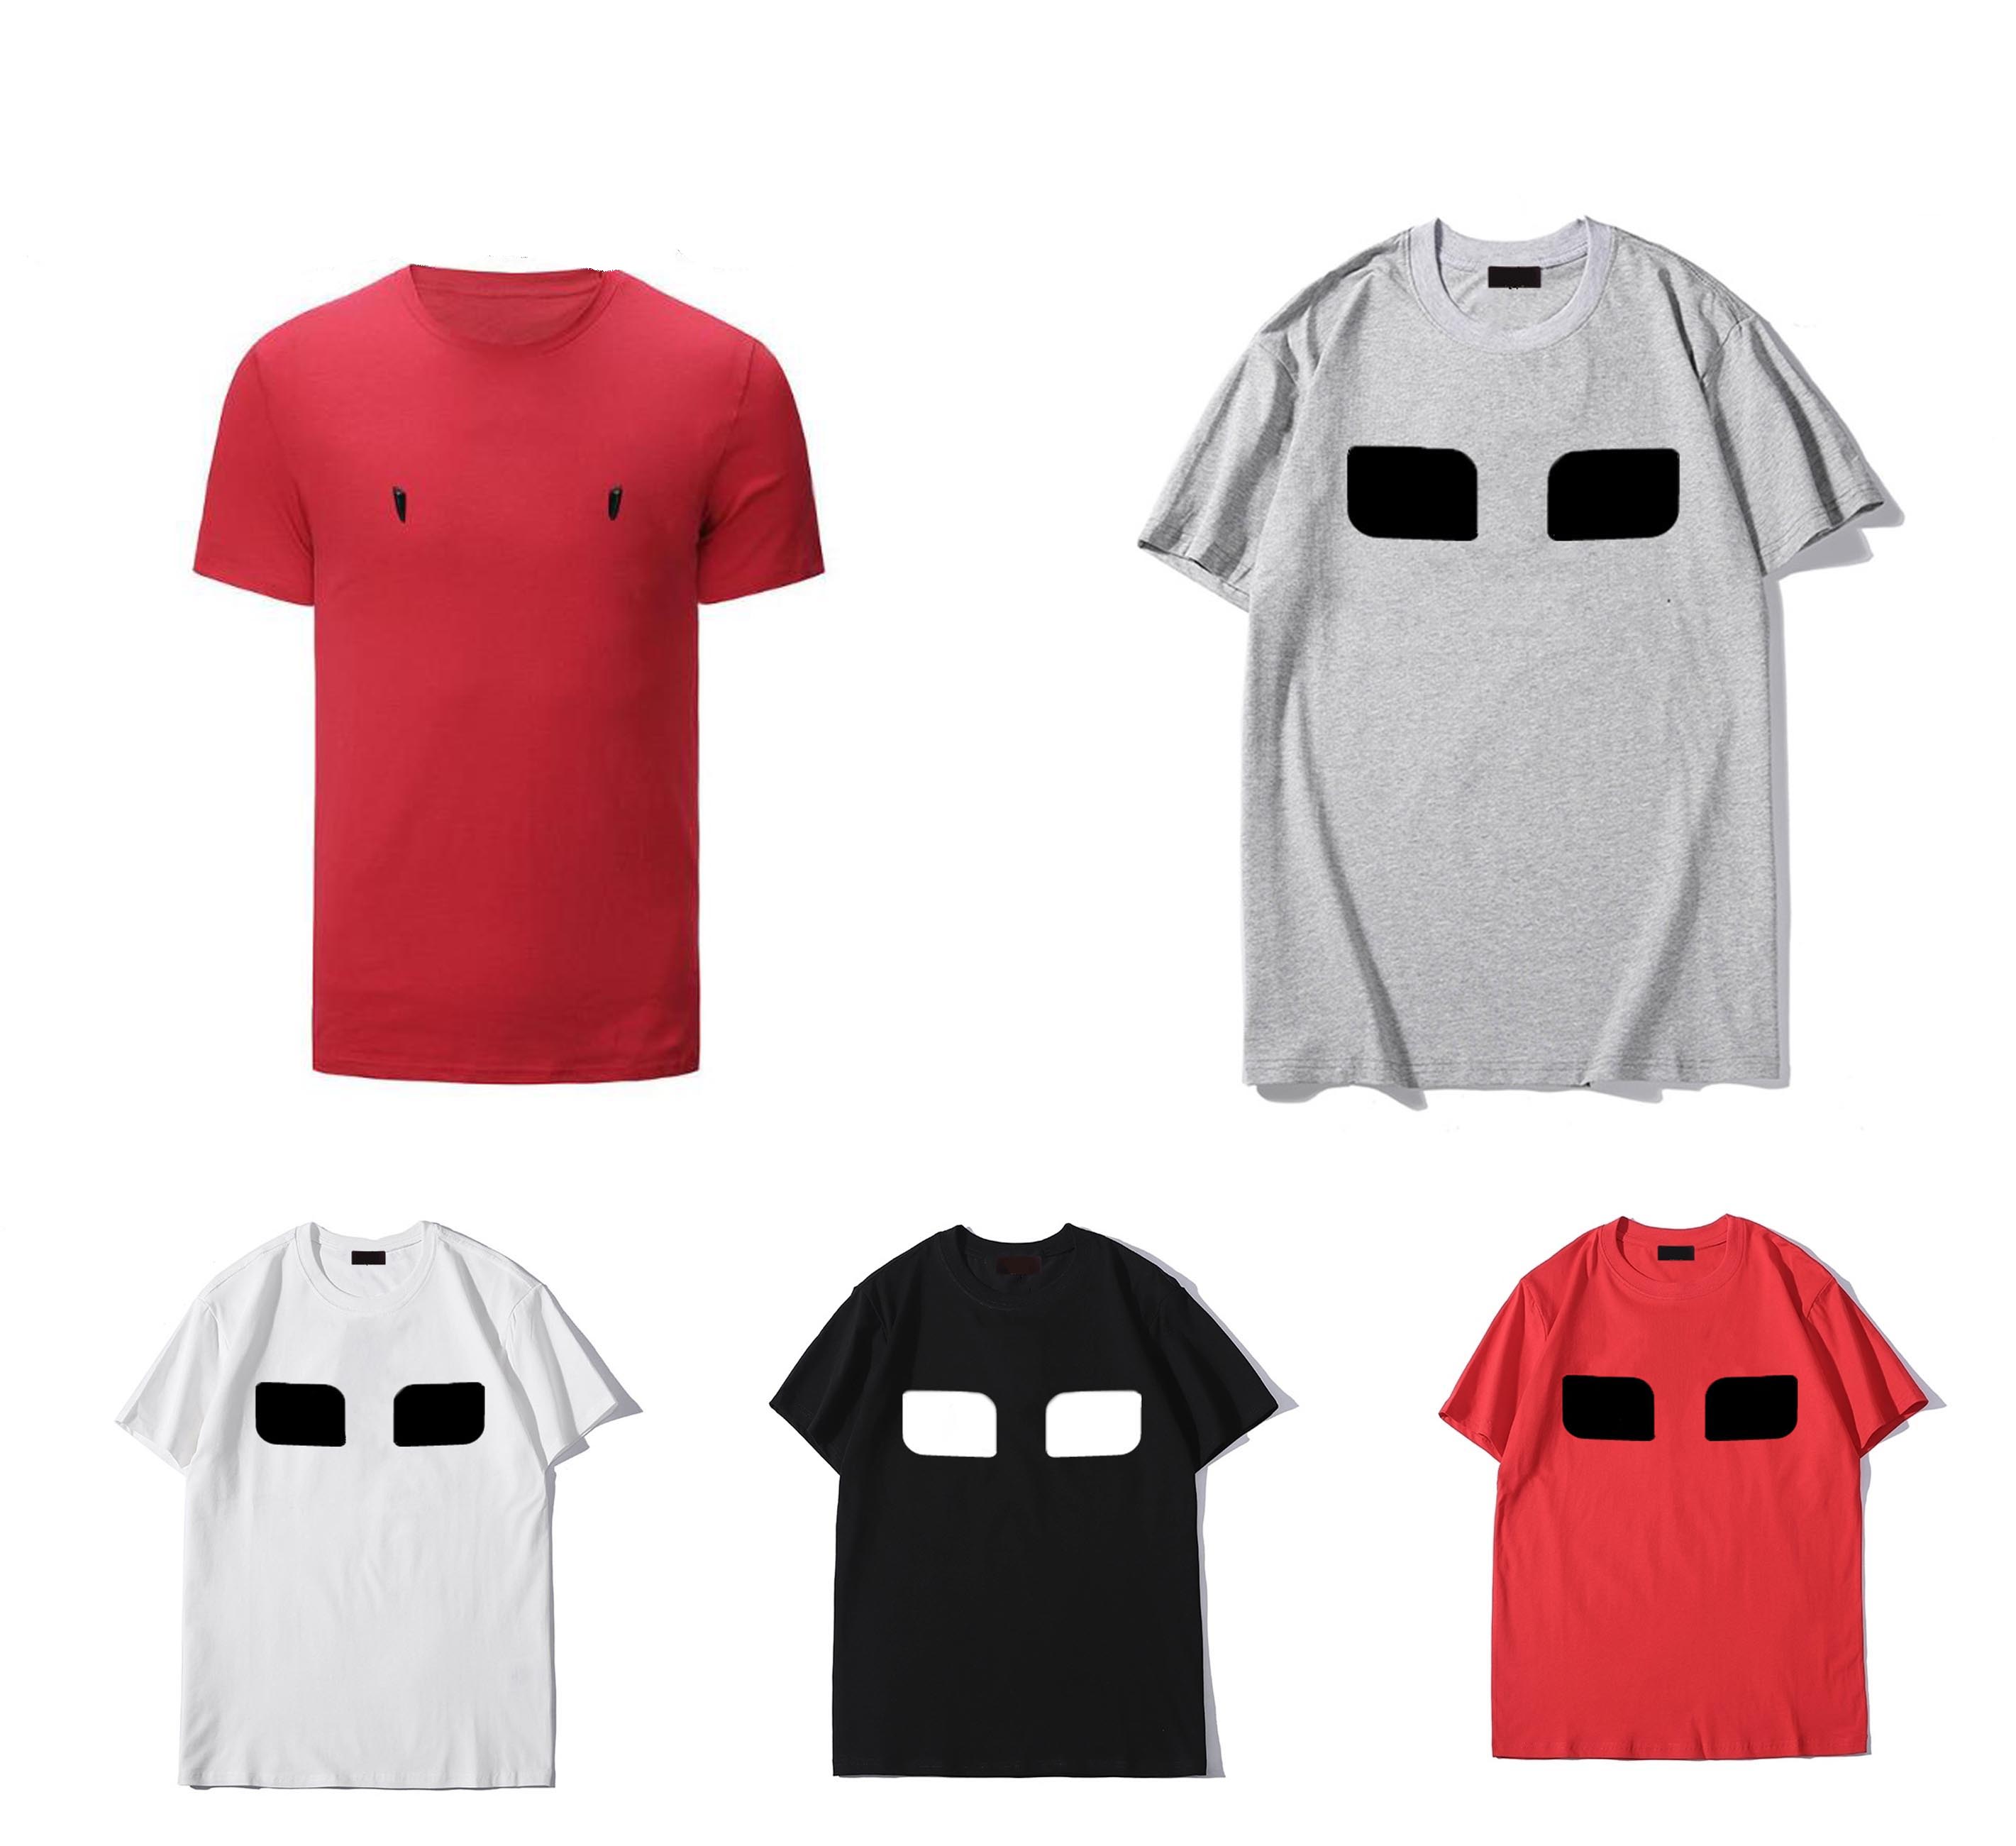 

EYES Men's T-shirts Summer Short Sleeves Fashion Printed Tops Casual Outdoor Mens Tees Crew Neck Clothes 21SS 7 Colors -3XL, No.2